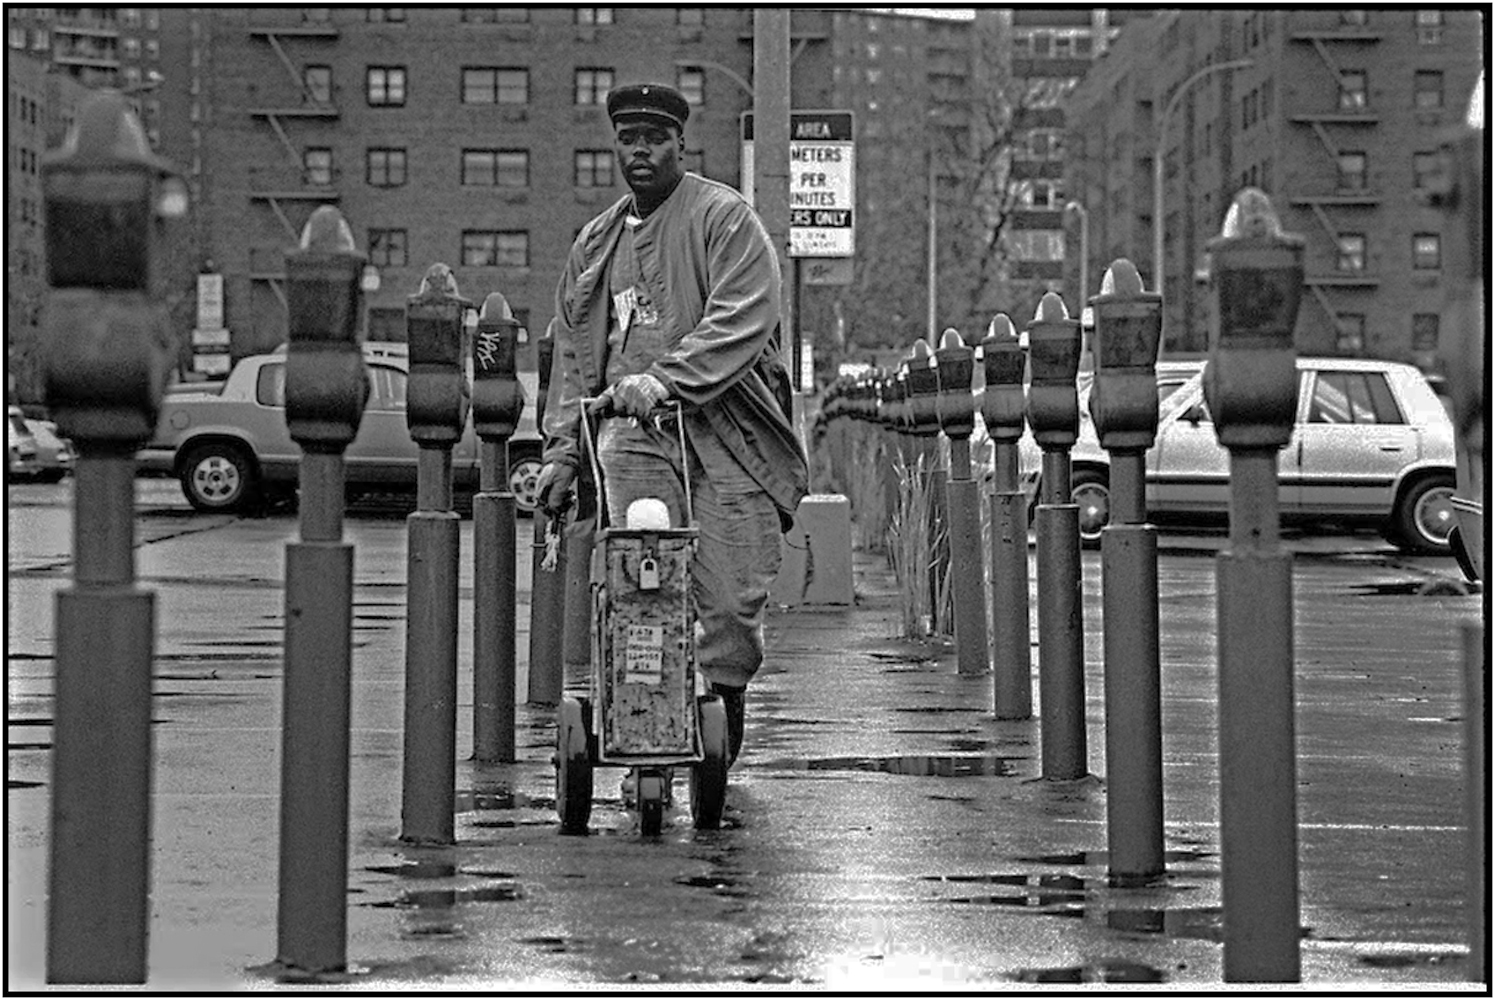   Keith Rhem, a parking meter service worker, collects quarters in a Queens municipal parking lot. 1990.  